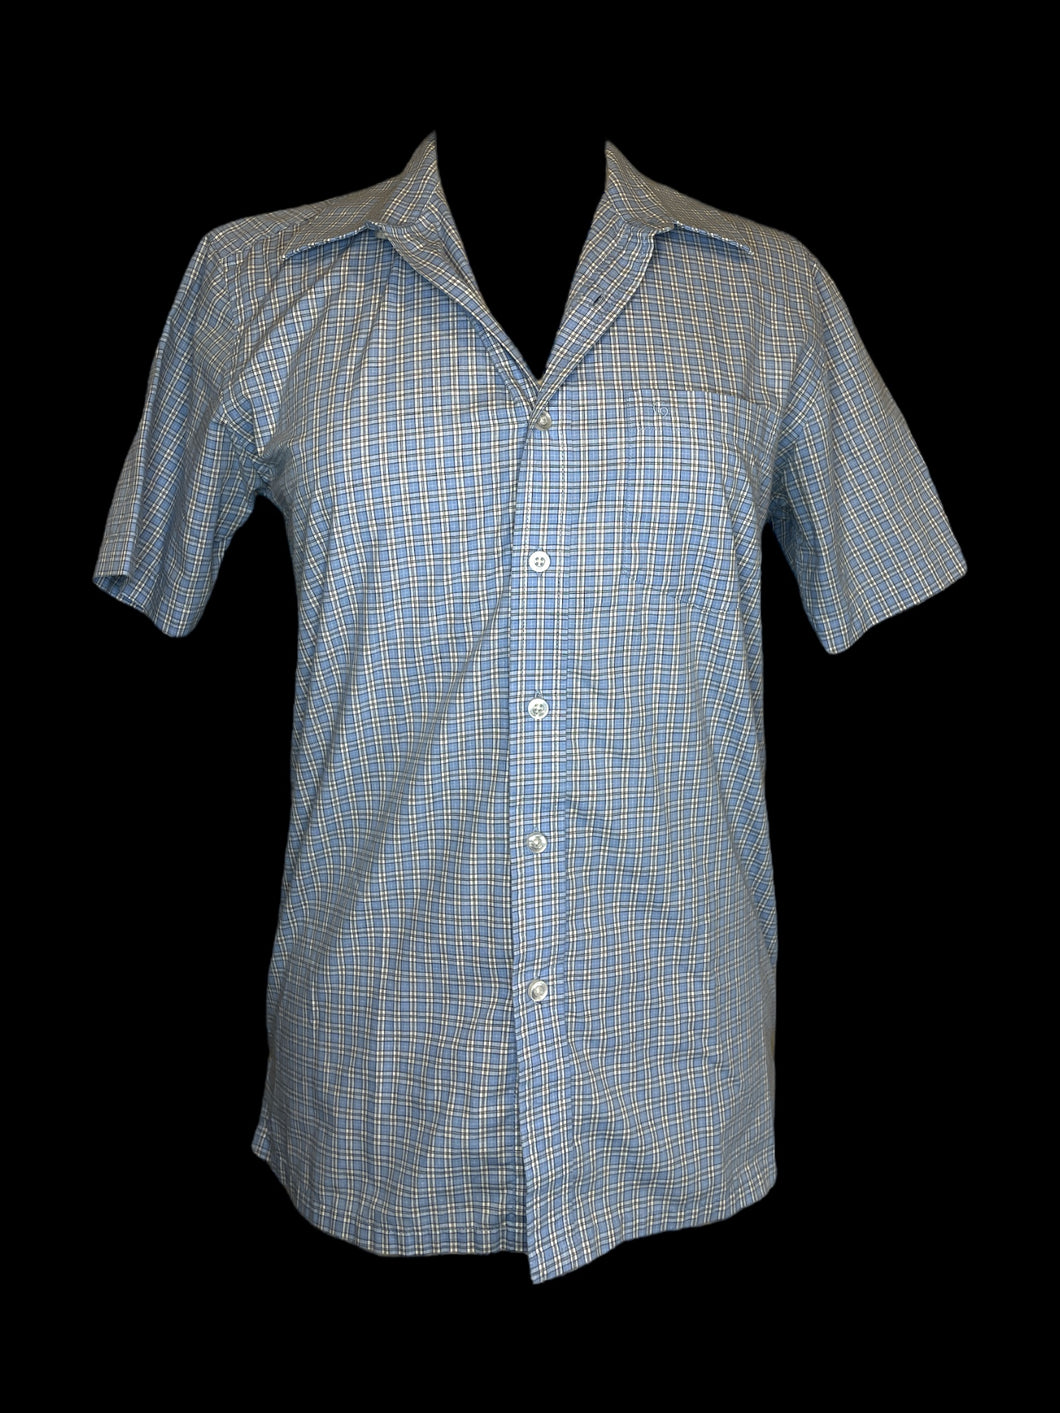 L Light blue & white gingham short sleeve button down collared shirt w/ chest pocket